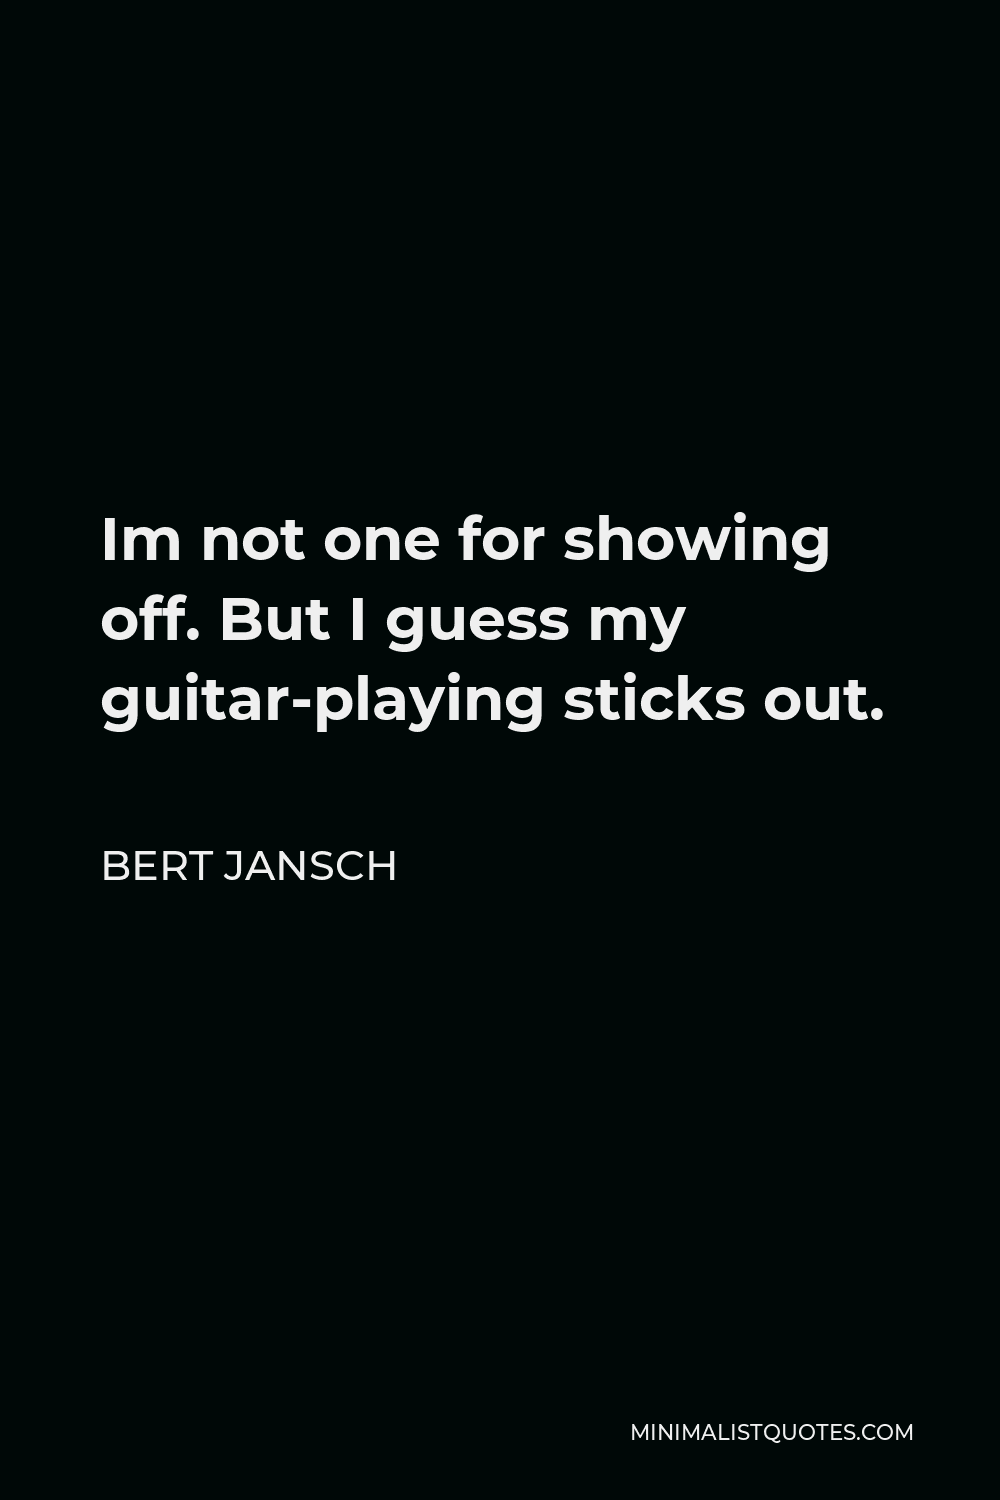 Bert Jansch Quote - Im not one for showing off. But I guess my guitar-playing sticks out.